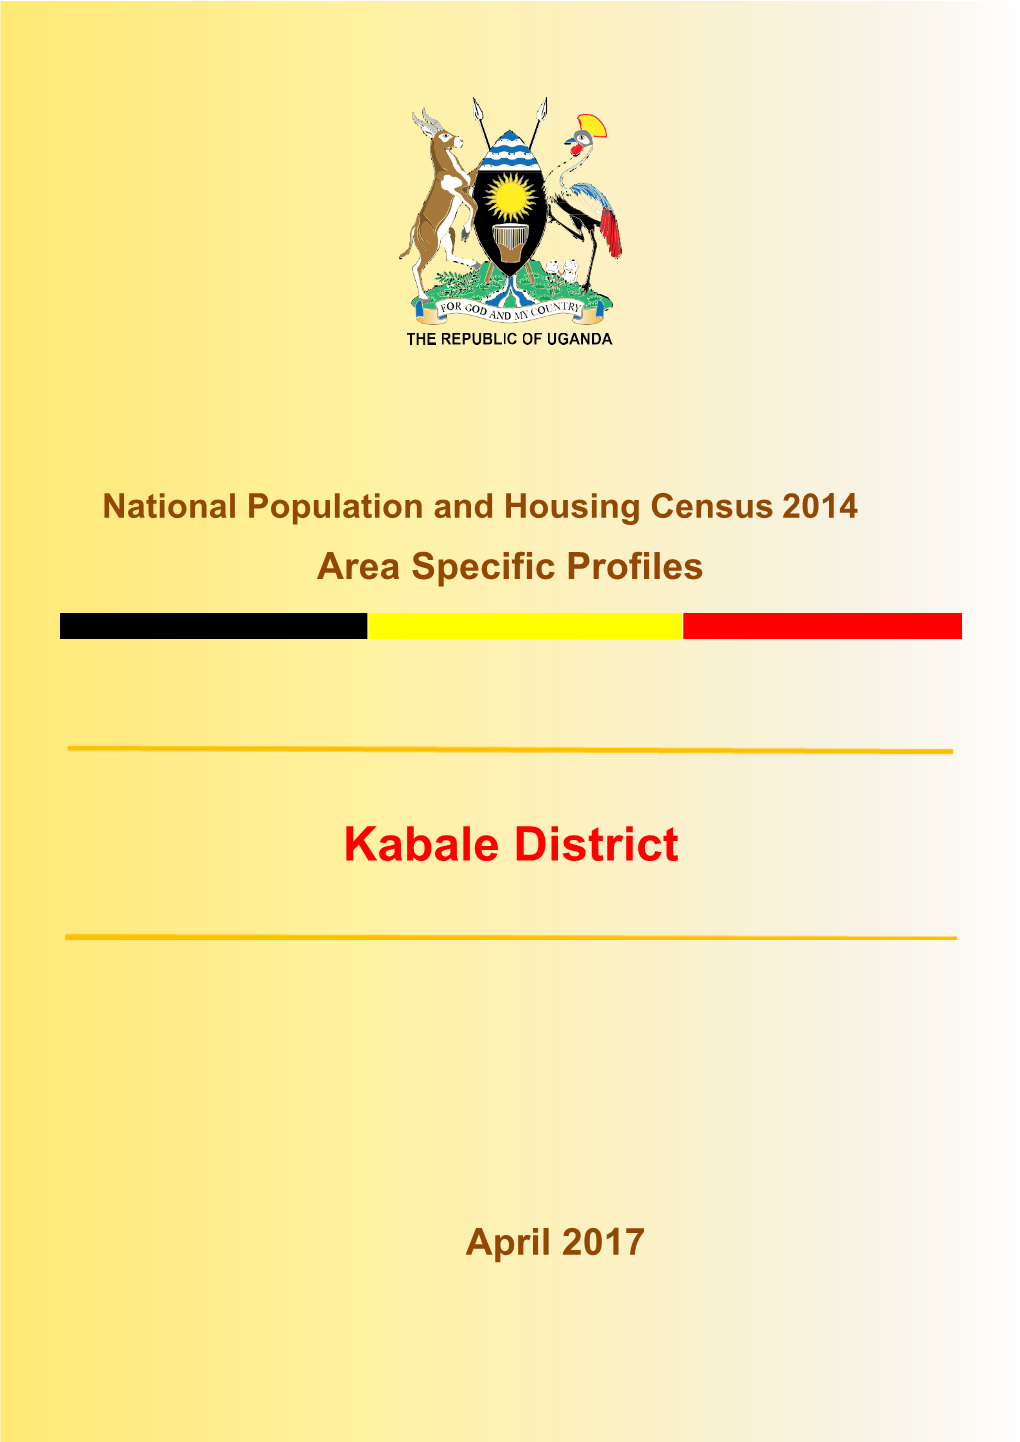 Kabale District